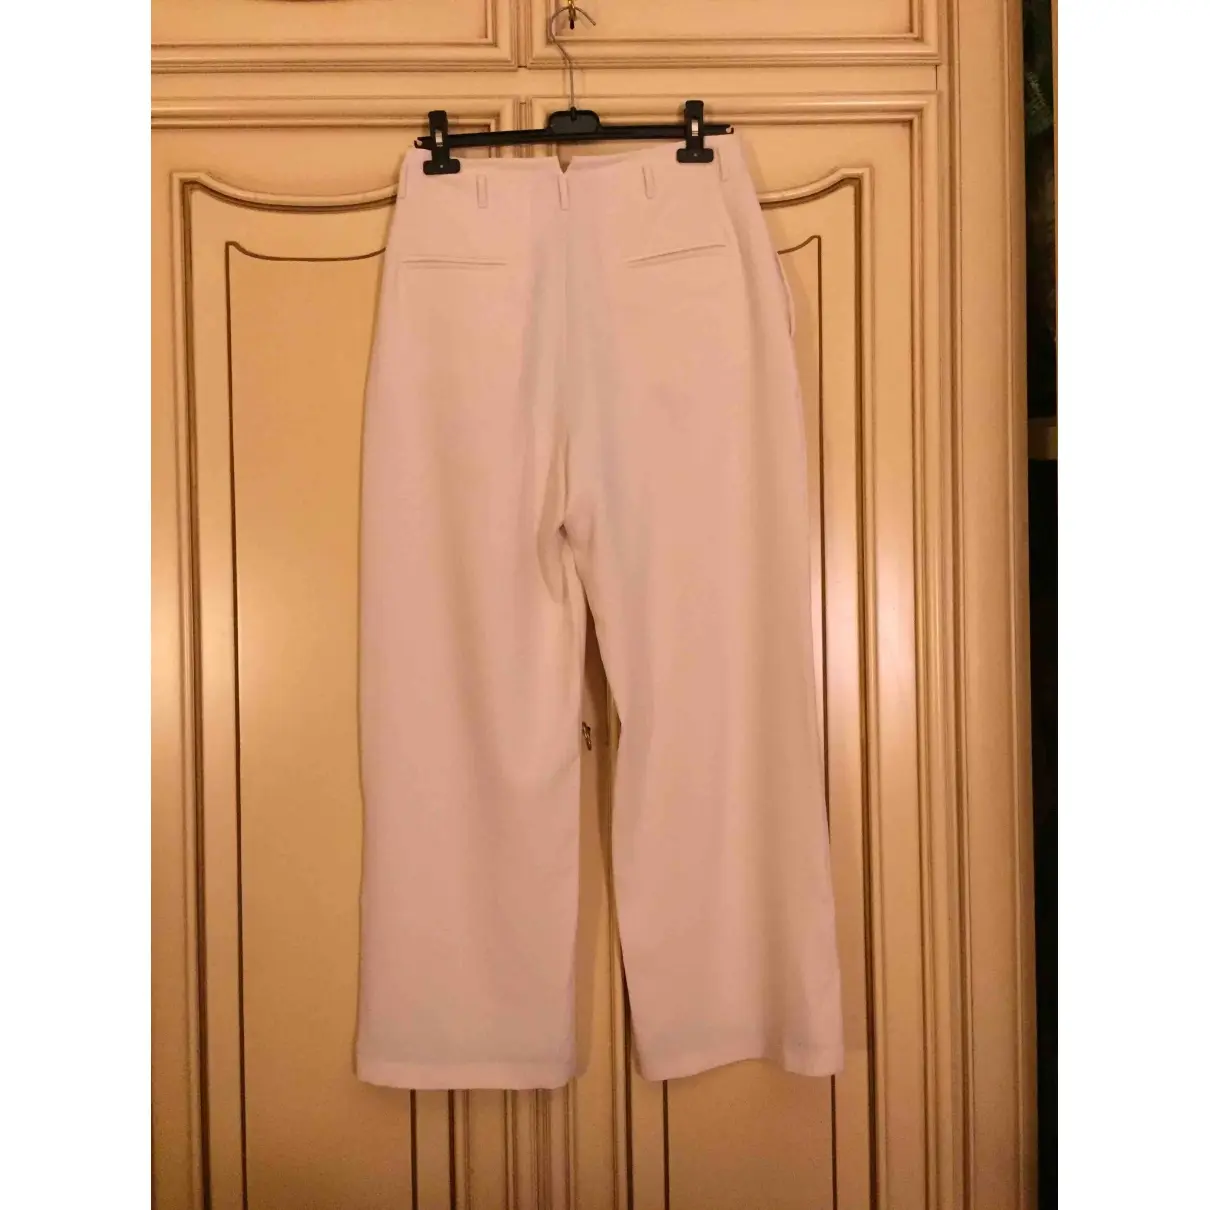 Liviana Conti Large pants for sale